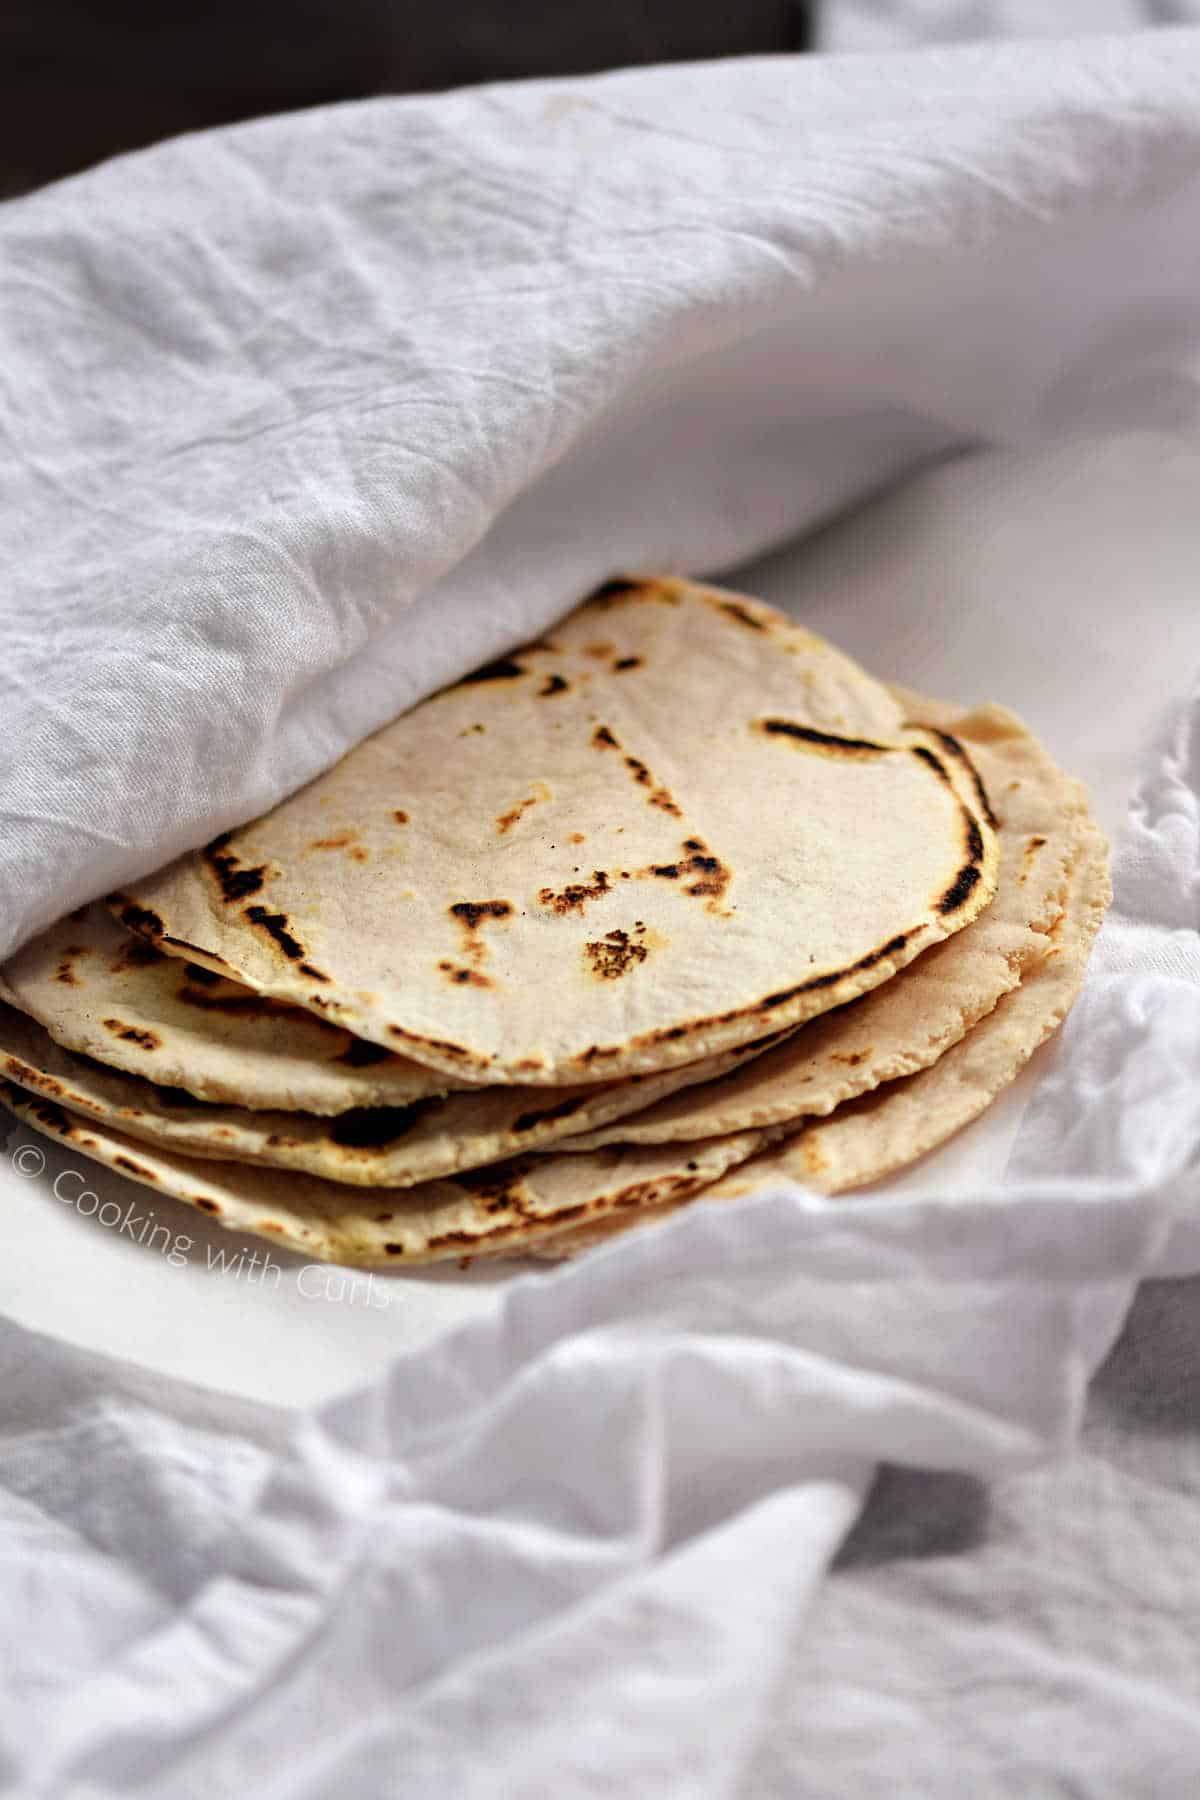 Six-cassava-flour-tortillas-stacked-on-a-white-towel.